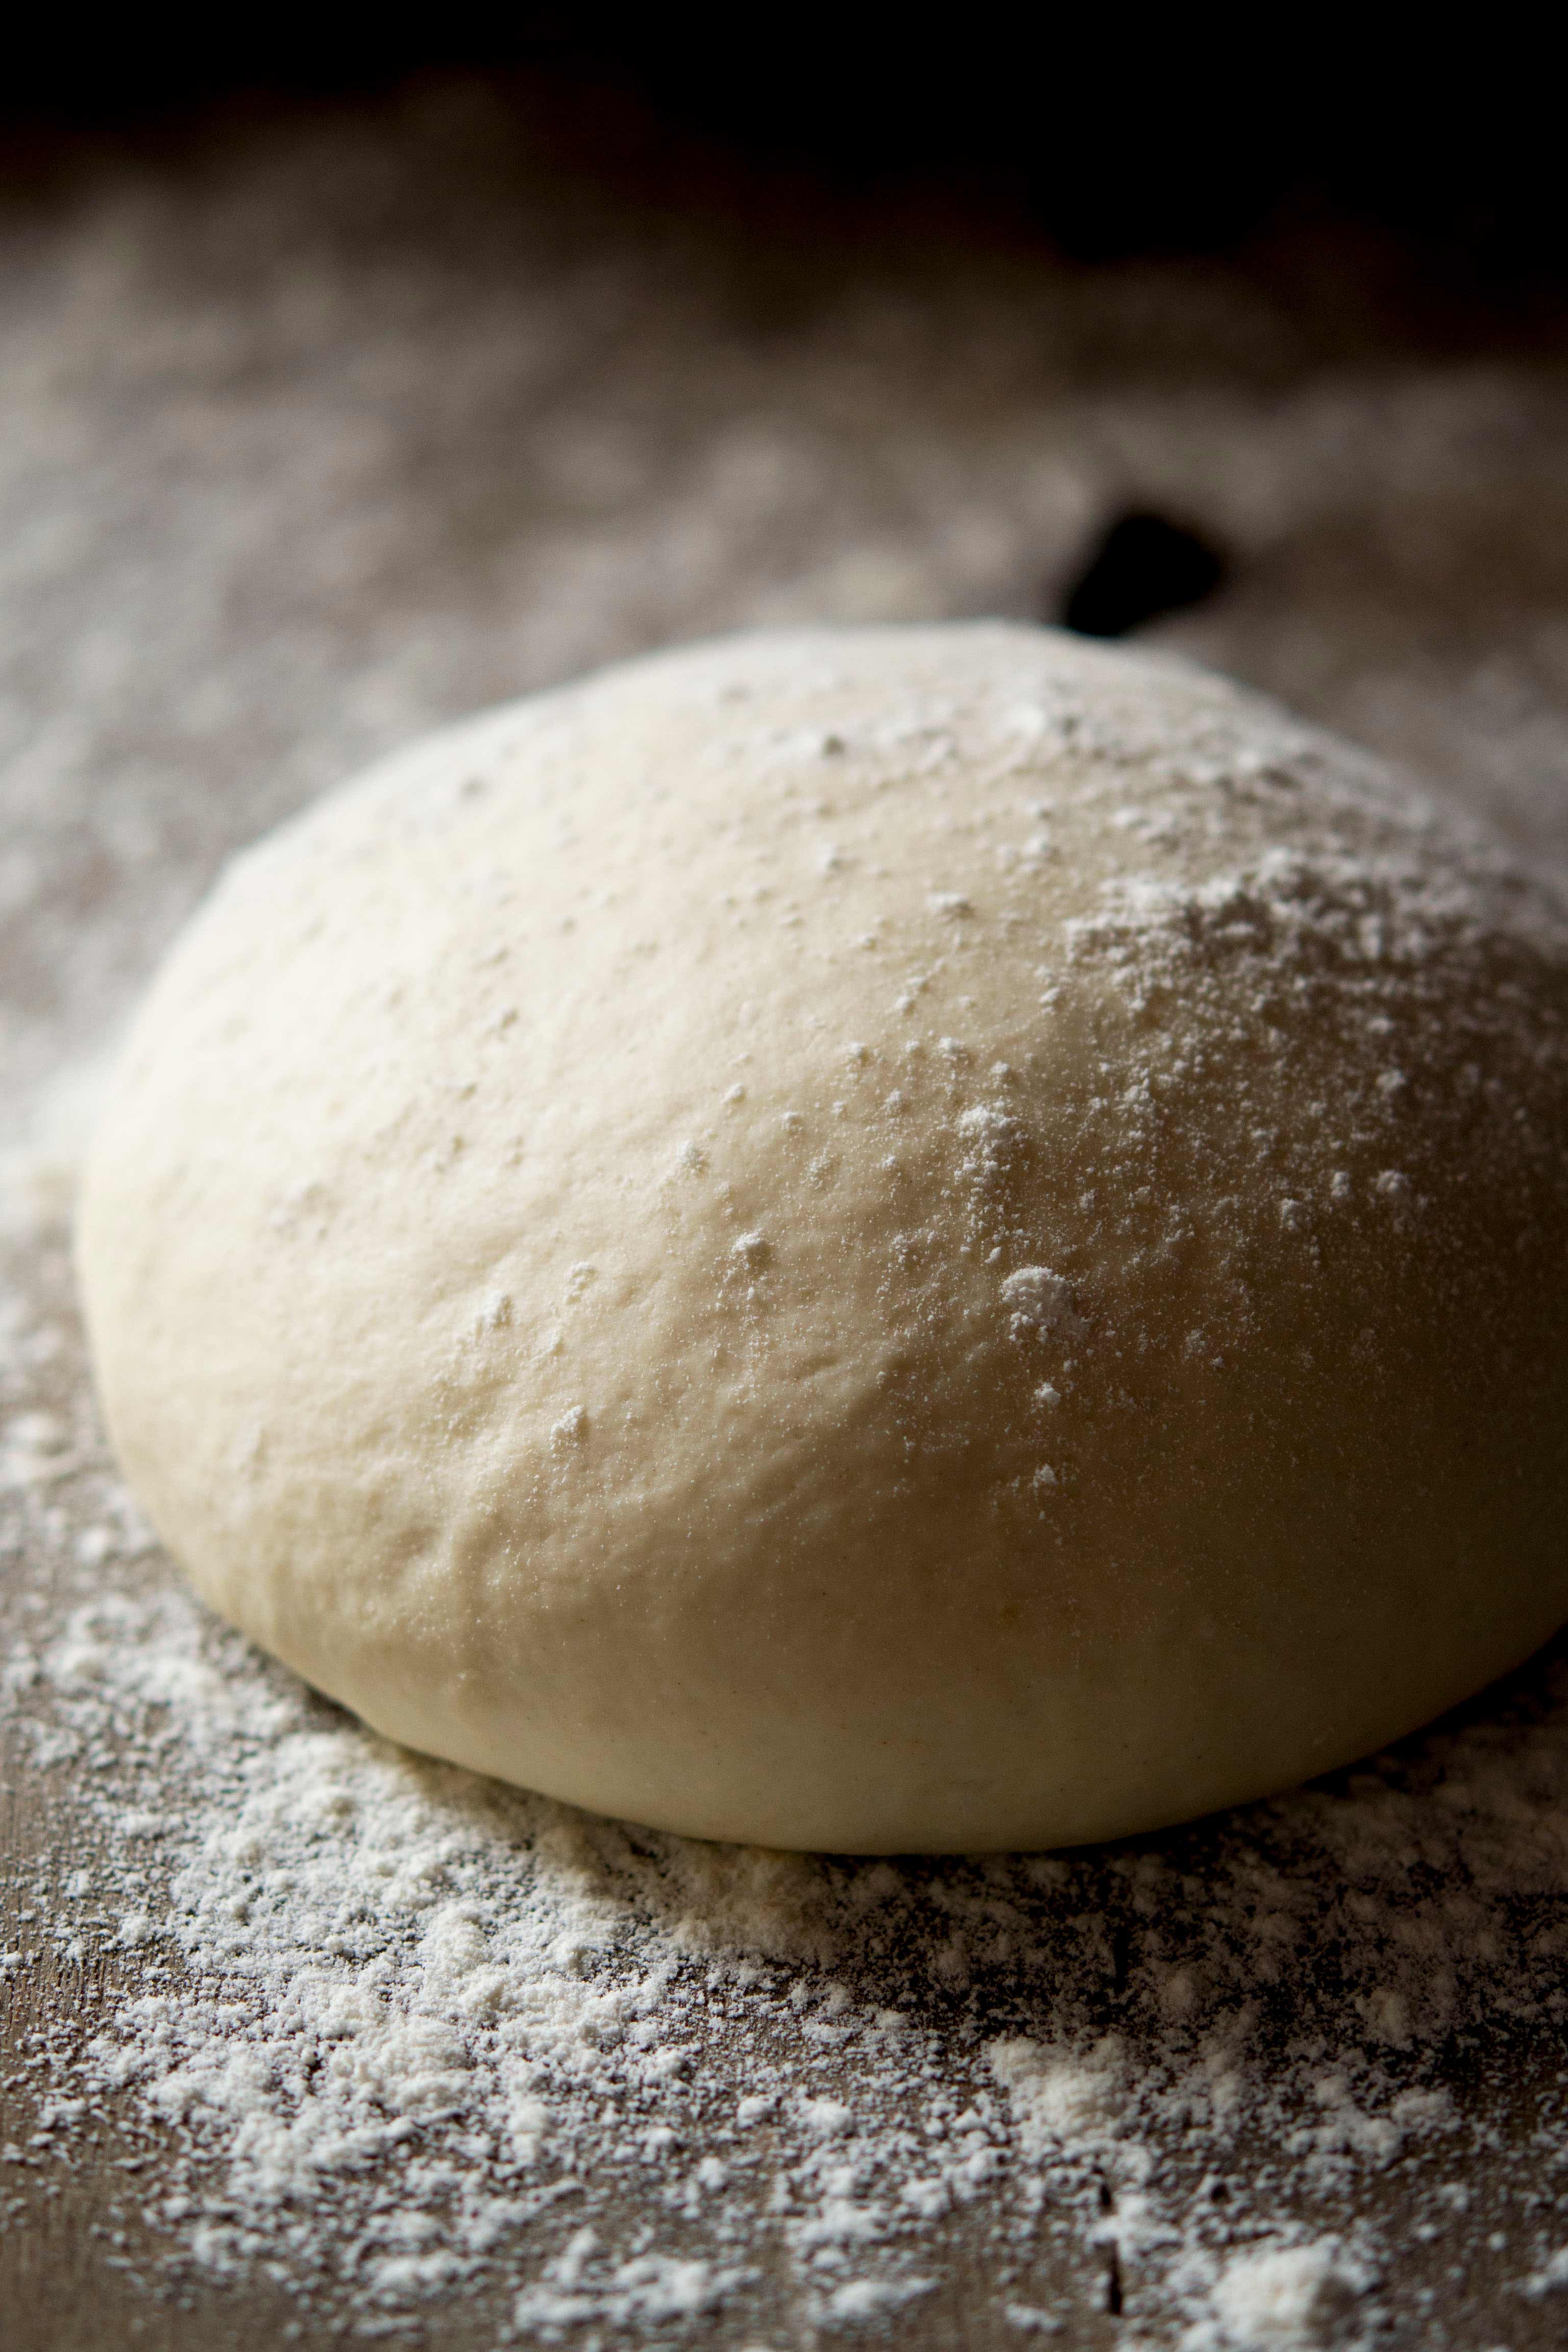 A close up of a ball of pizza dough